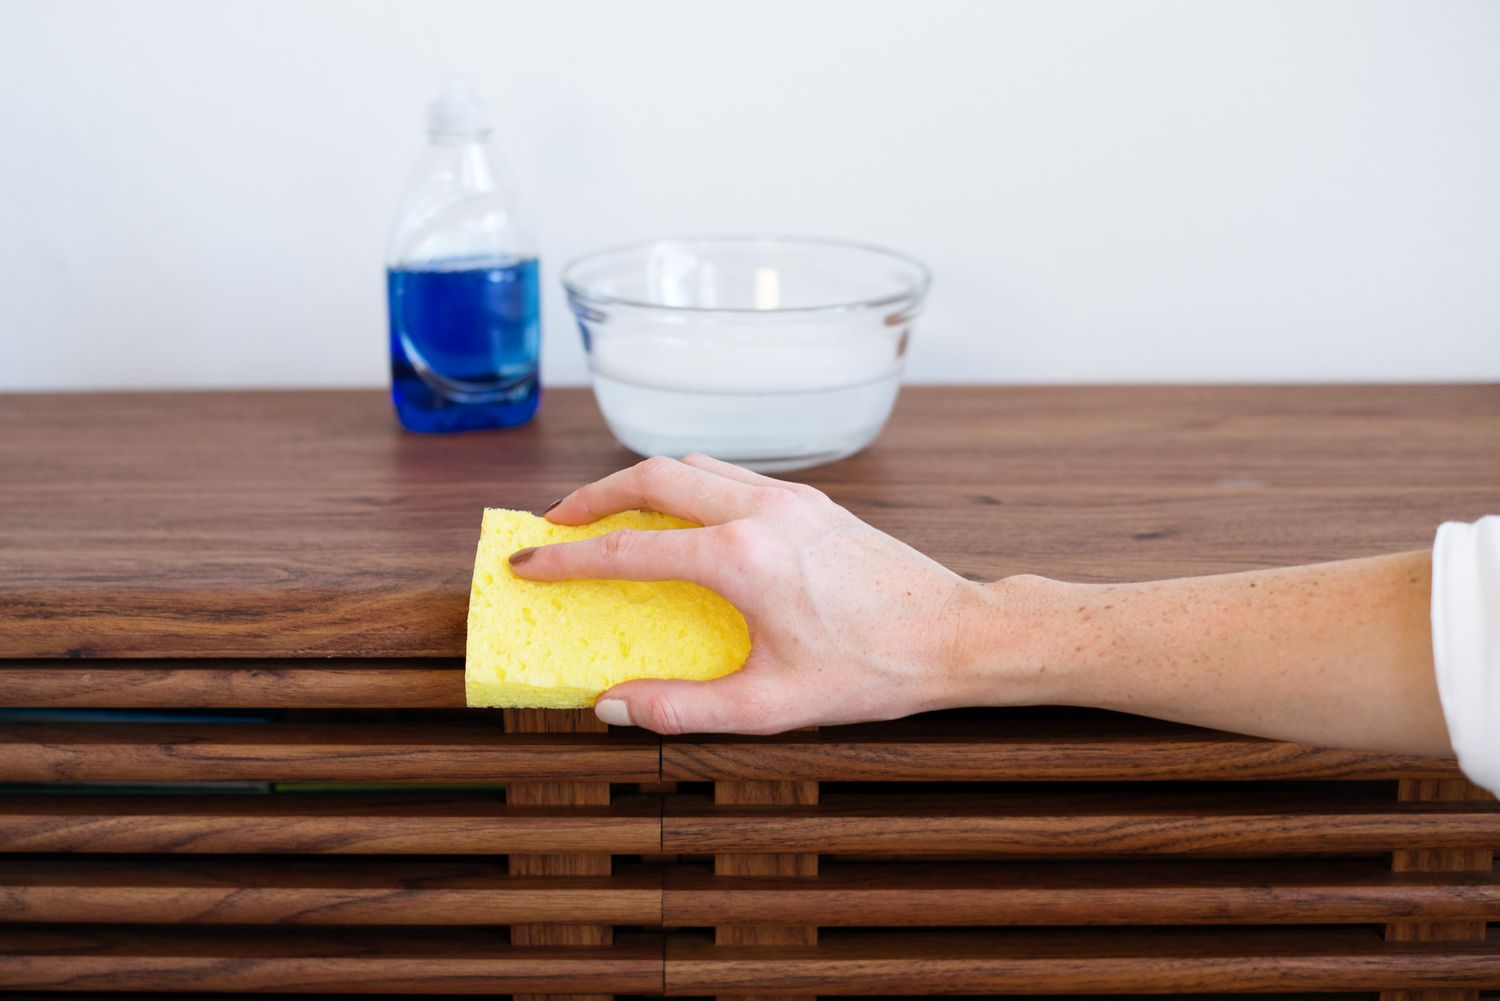 Use a dish soap gentle cleaning solution when cleaning wooden furniture to remove grime